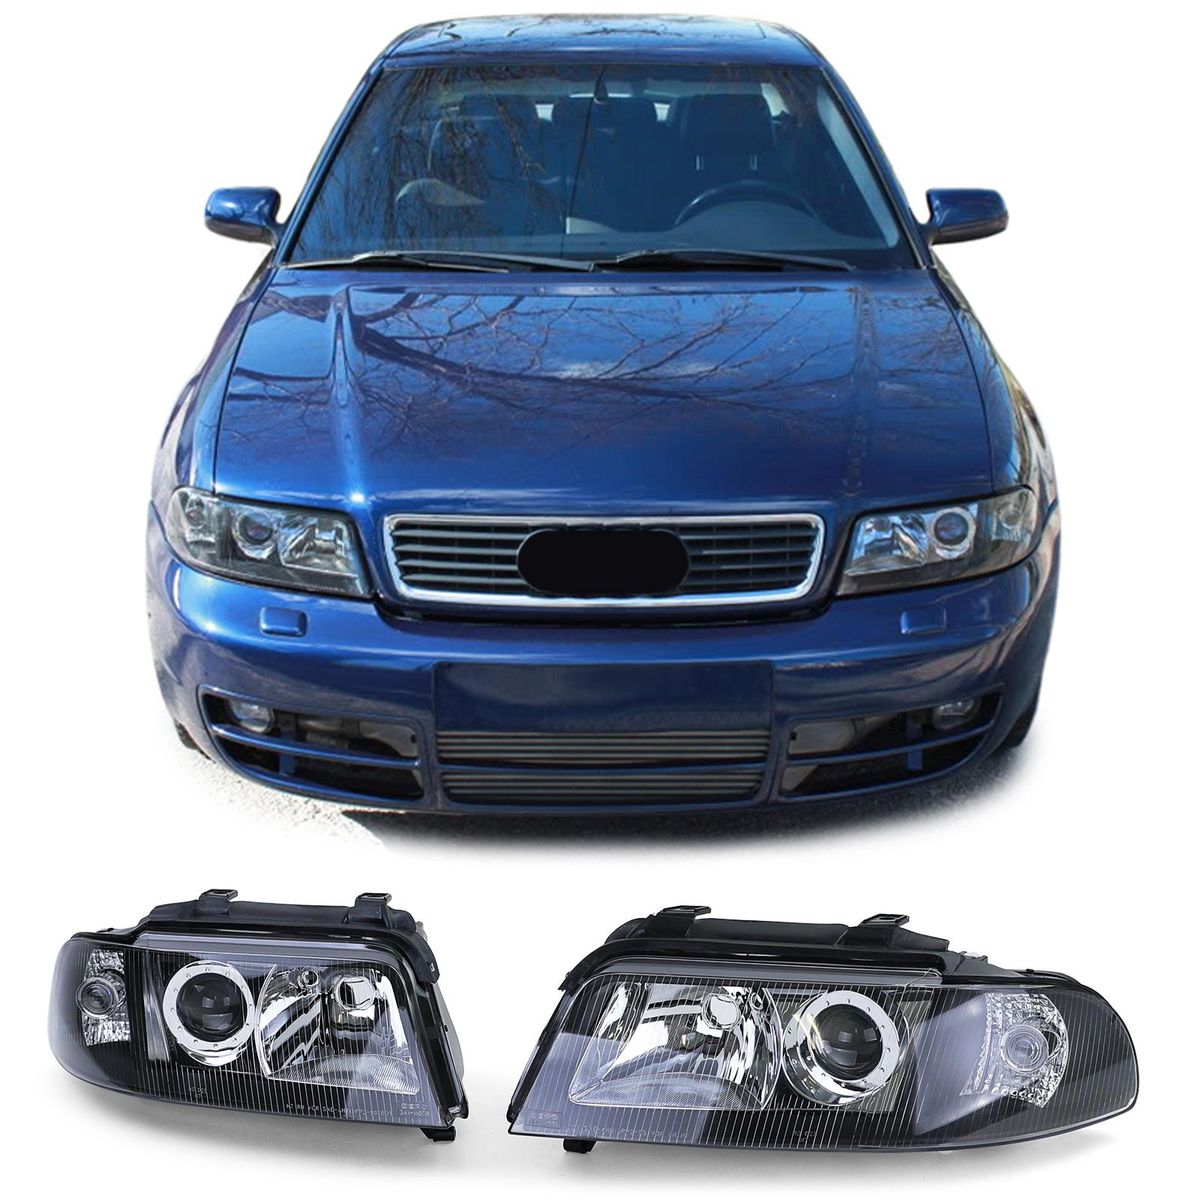 Absolutely Document Devastate S4 Black Headlights pair For Audi A4 / S4 95-01 Facelift Look in Headlights  - buy best tuning parts in ProTuning.com store